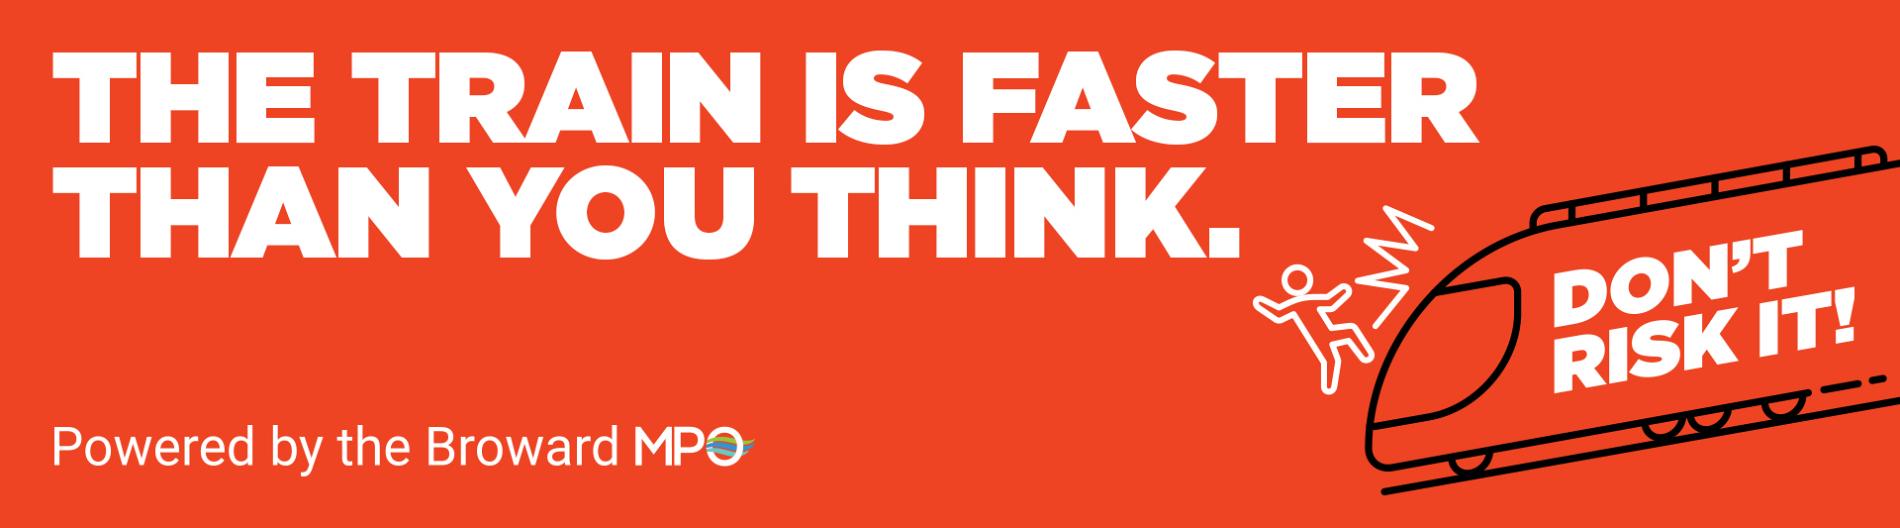 Rail Safety Campaign Header Image